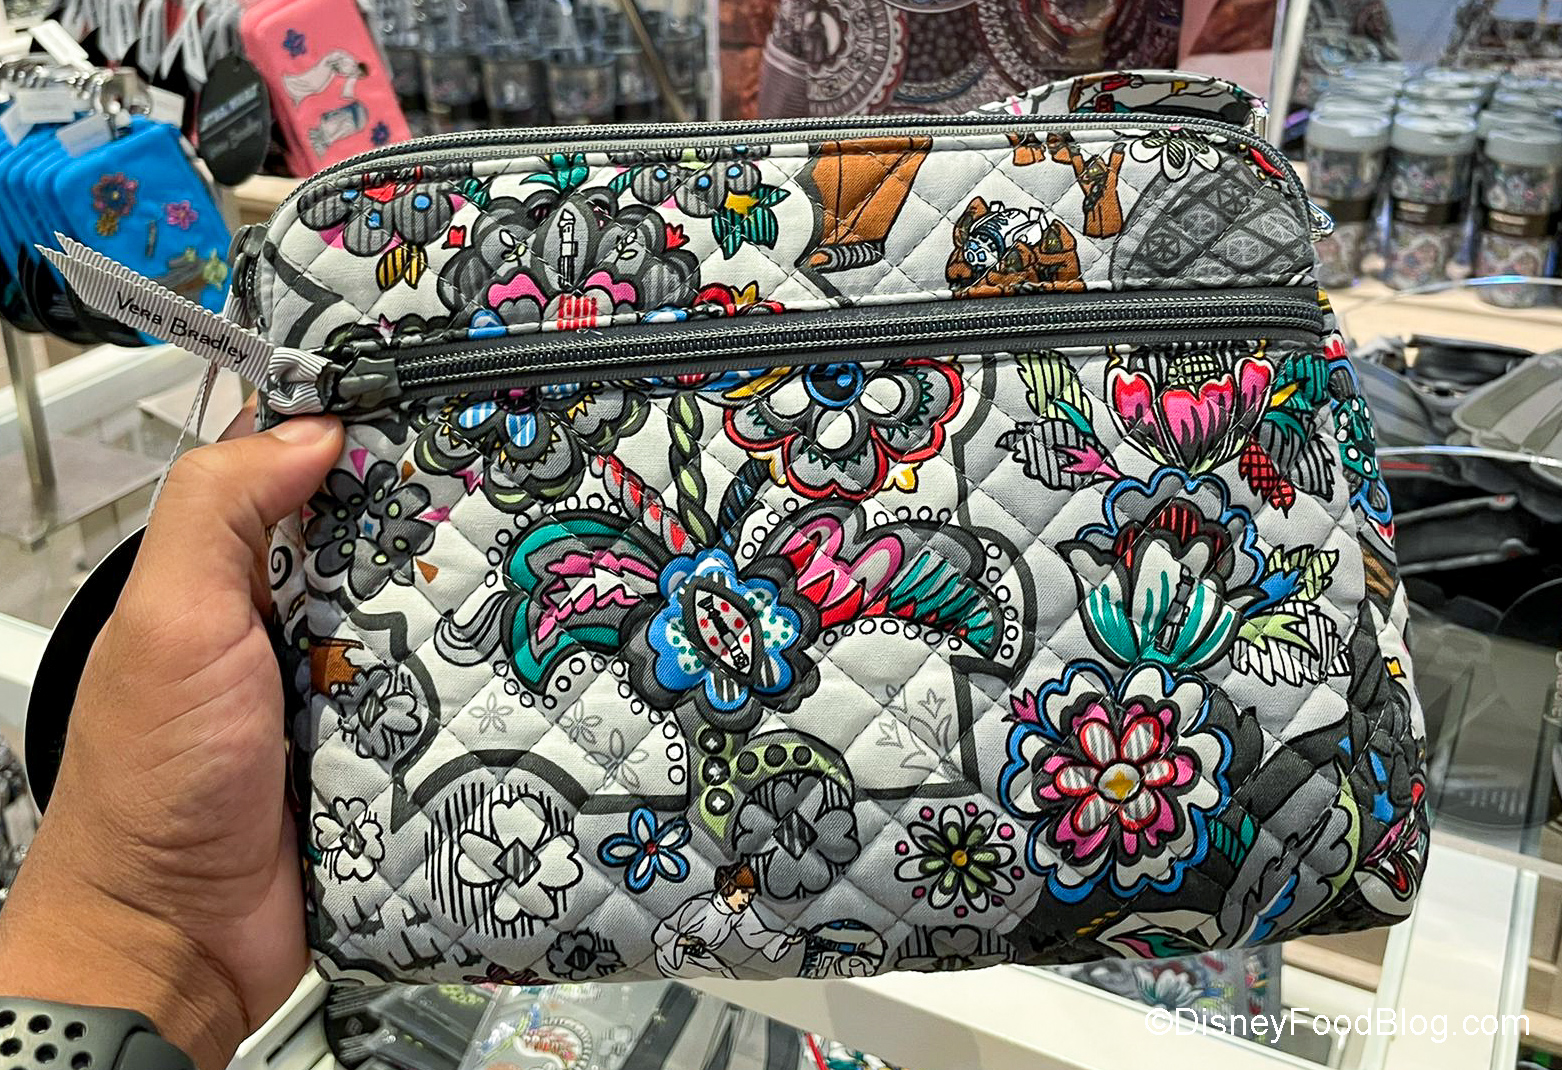 Star Wars Fans: The Vera Bradley Collection of Your Dreams Has